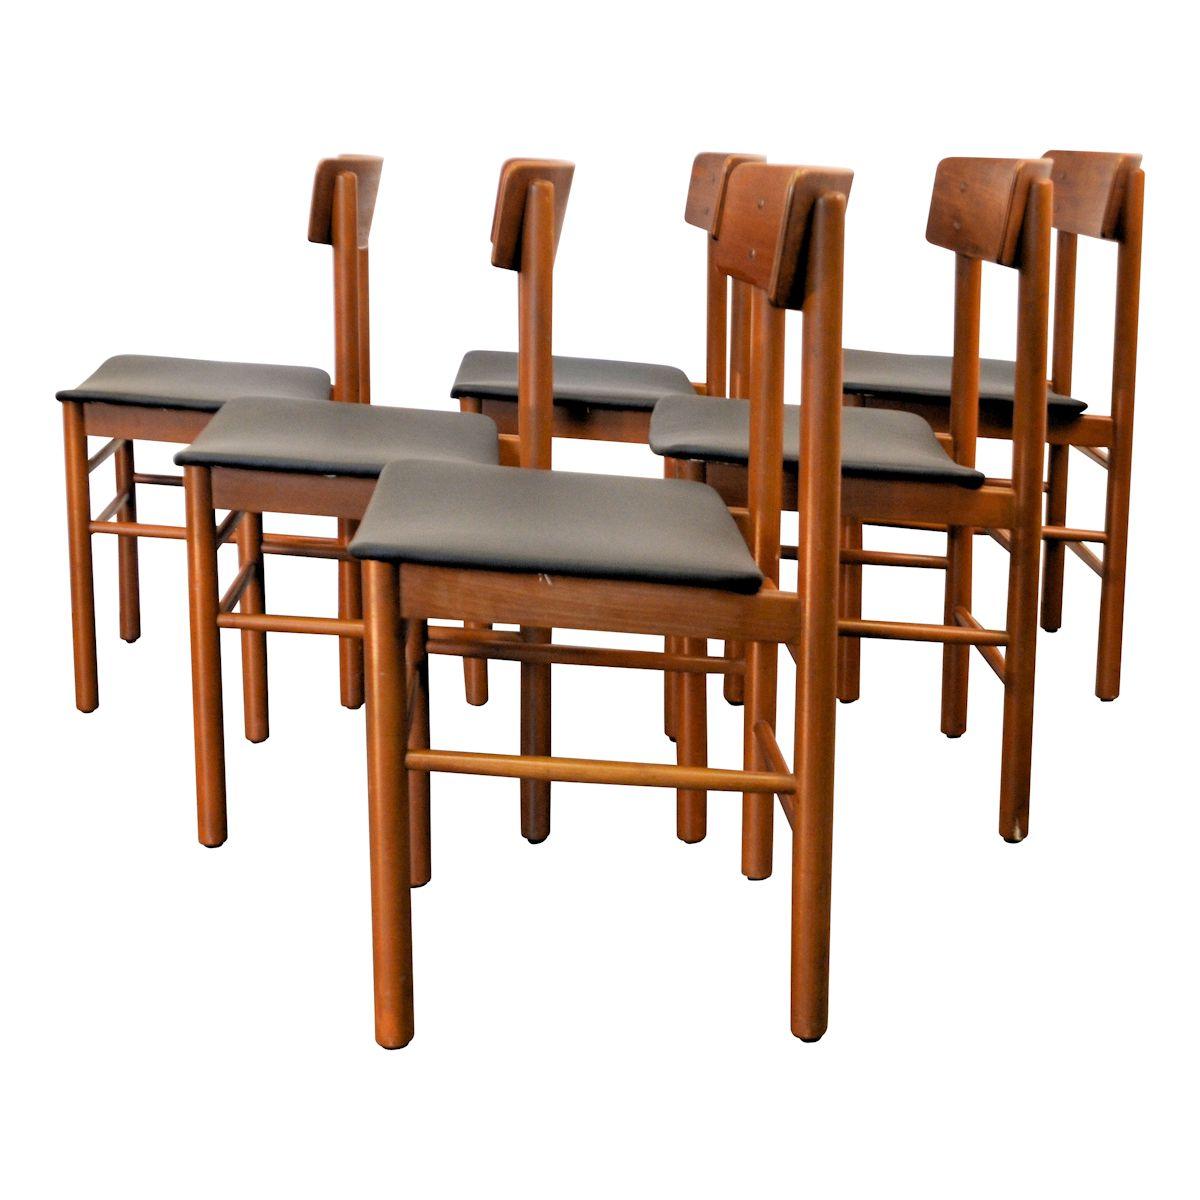 Set of 6 Mid-Century Modern Danish design teak/beech dining chairs produced by Farstrup during the 1960s. All chairs have a new black Skai leather upholstery.